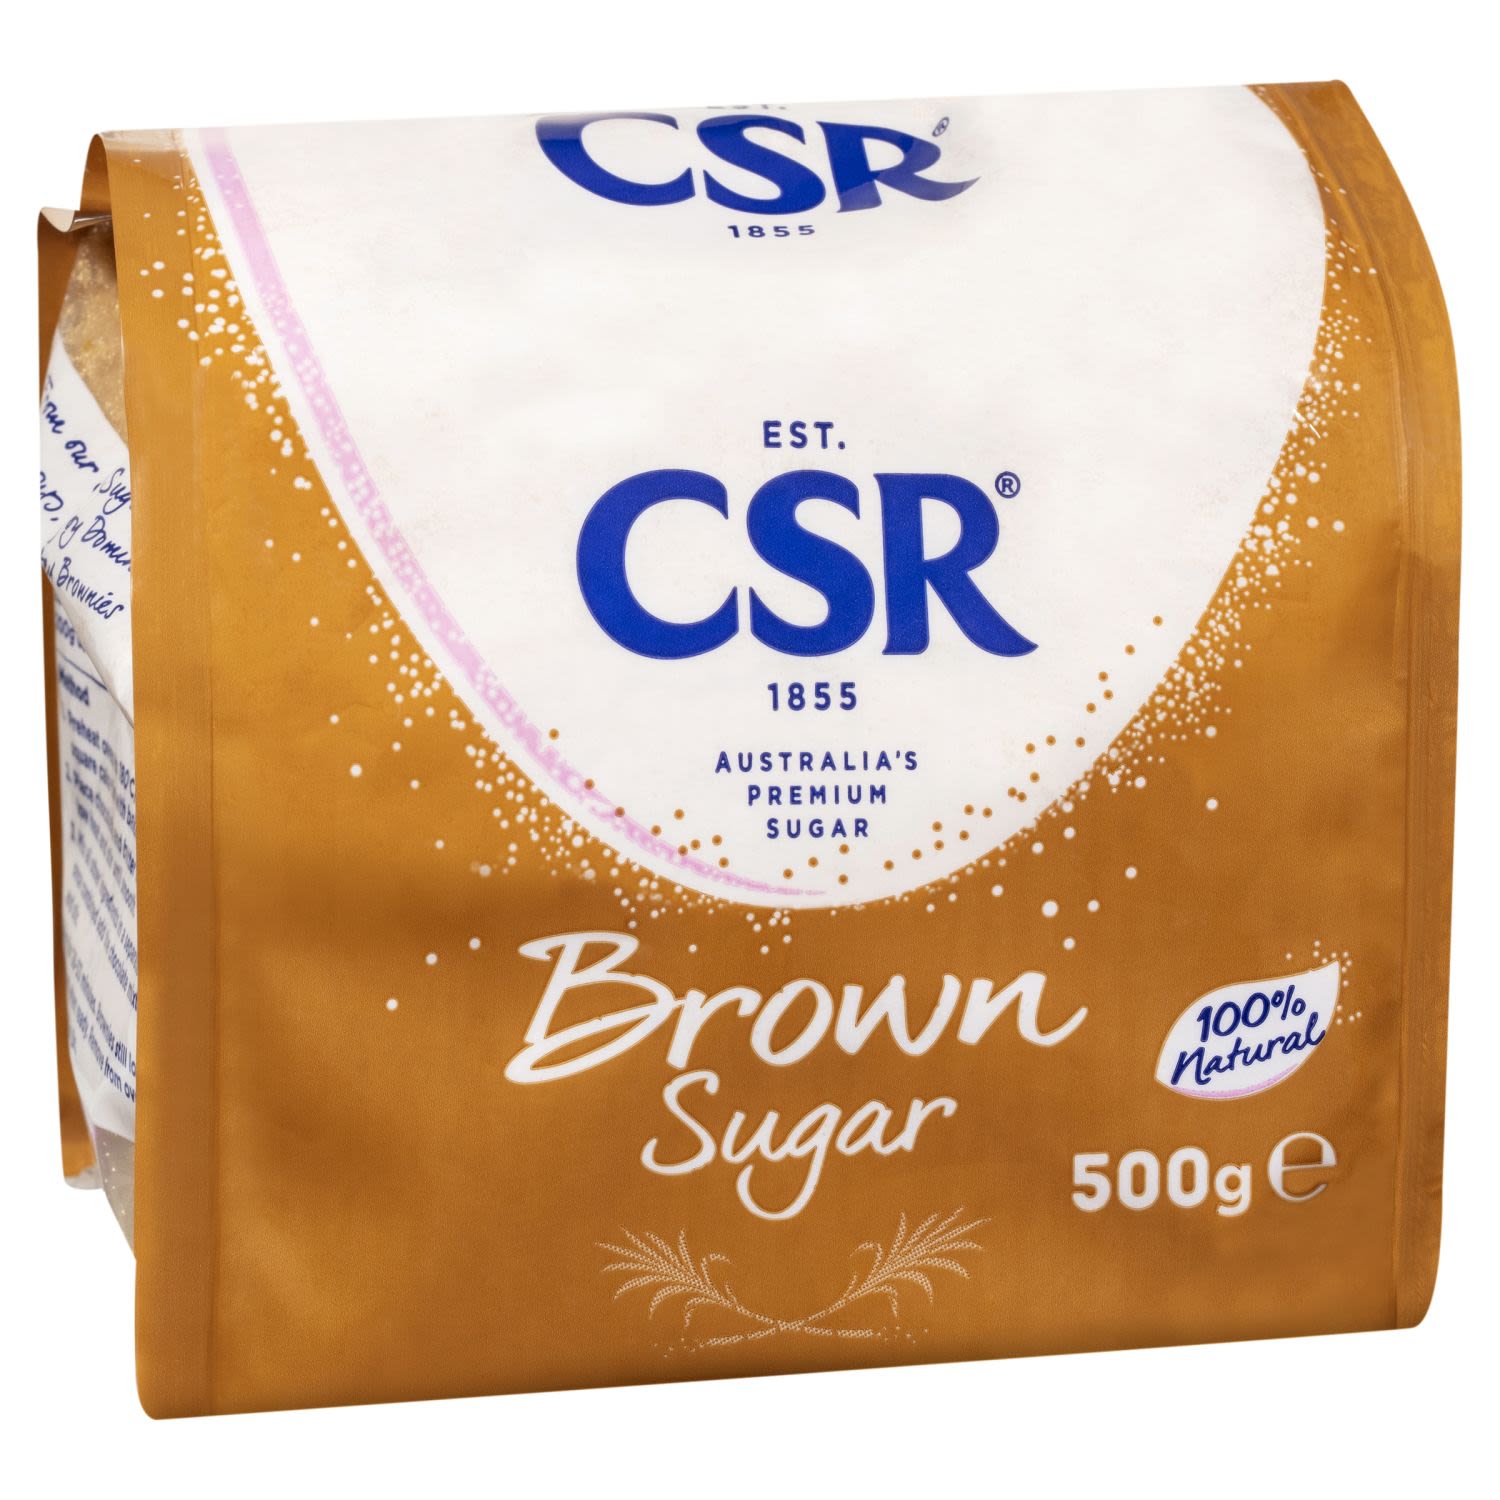 A versatile ingredient suitable for cooking, baking and sweetening beverages, CSR Brown Sugar is a real kitchen essential. Known for it's delicate, caramelly sweetness, this sugar brings the perfect flavour to chewy choc chip cookies, cinnamon bars and toffee cakes. CSR Brown Sugar is 100% natural and is also a great ingredient in barbecue glazes and salad dressings.<br /> <br /> <br /><br />Country of Origin: Made in Australia